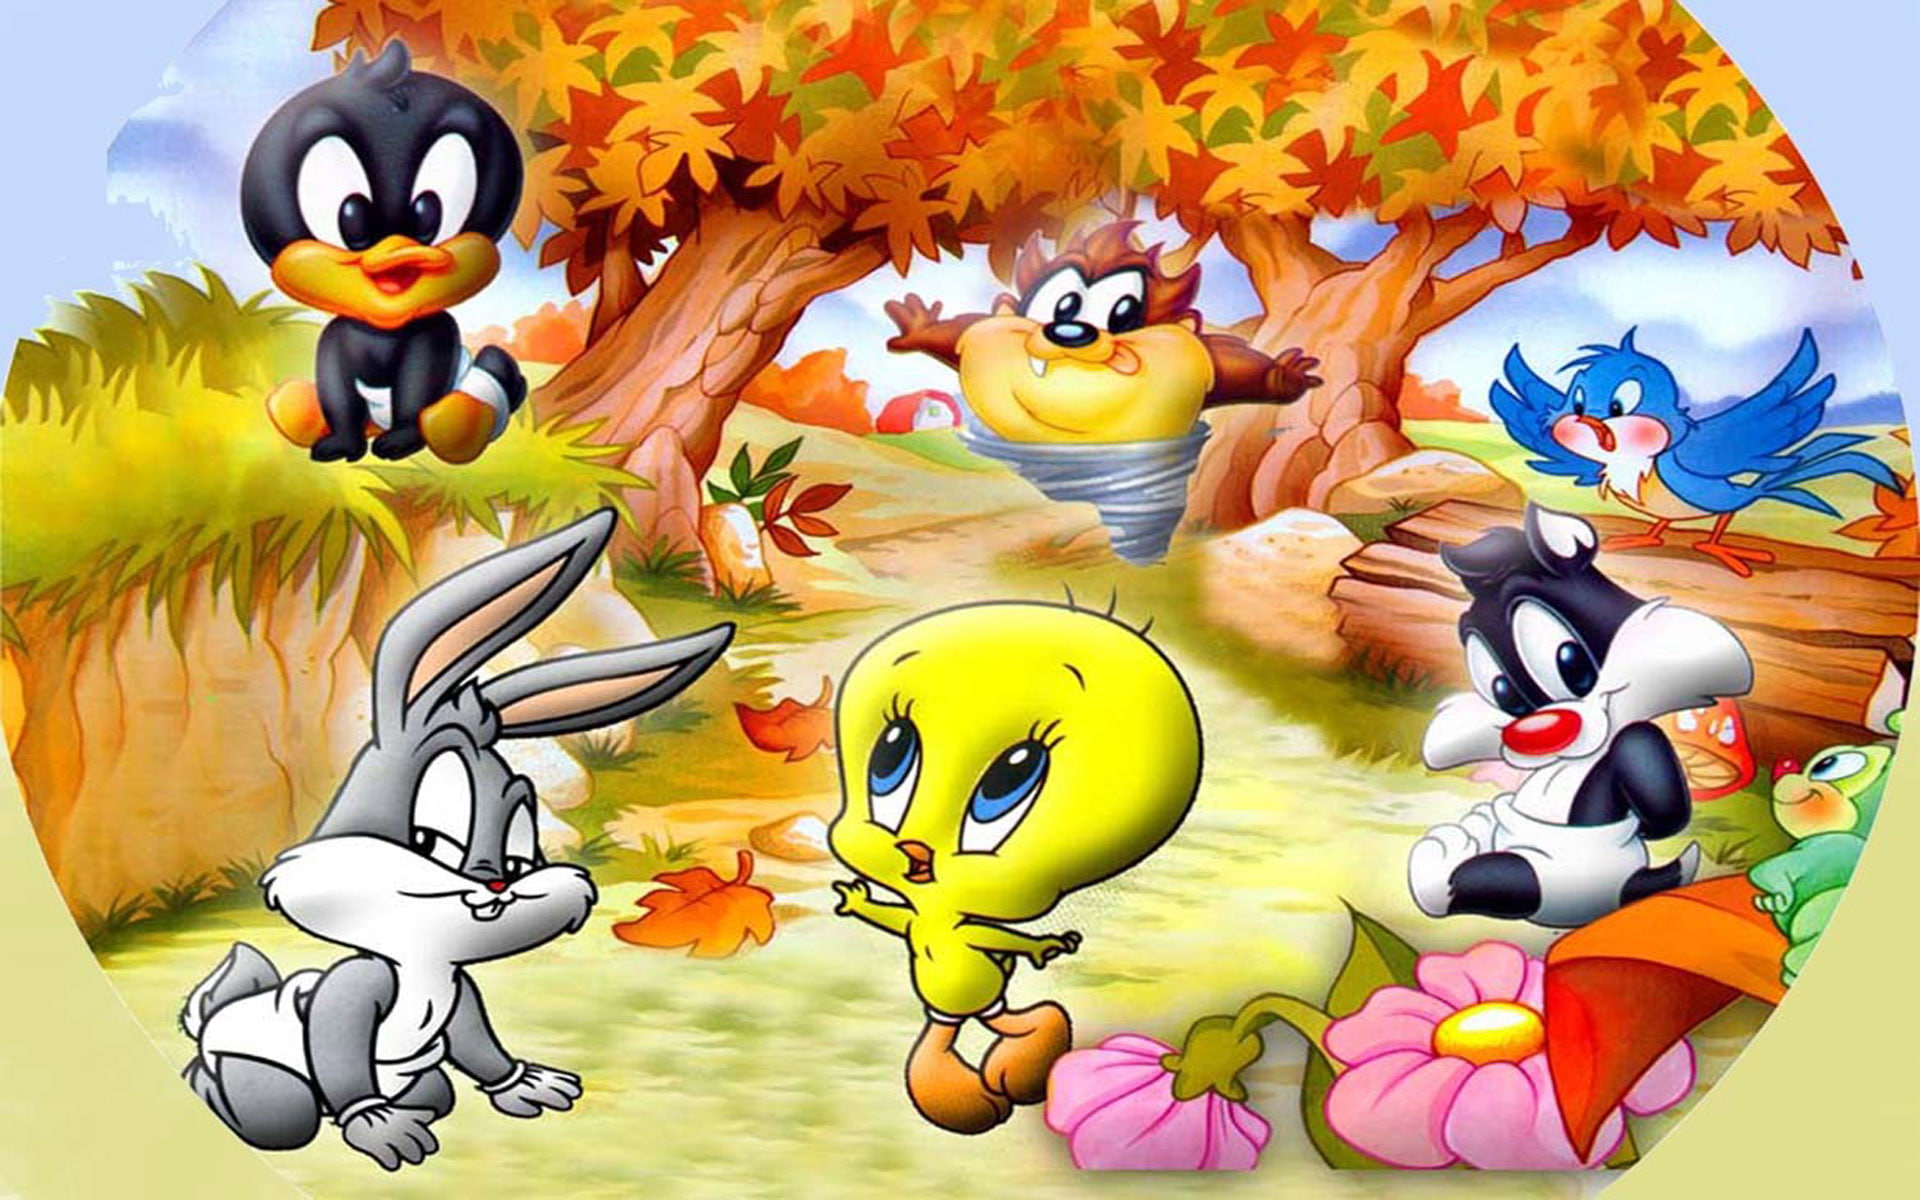 Characters Looney Tunes Baby Tweety Daffy Duck Bugs Bunny Sylvester The Cat And Tasmanian Devil Full Hd Wallpapers 1920×1200